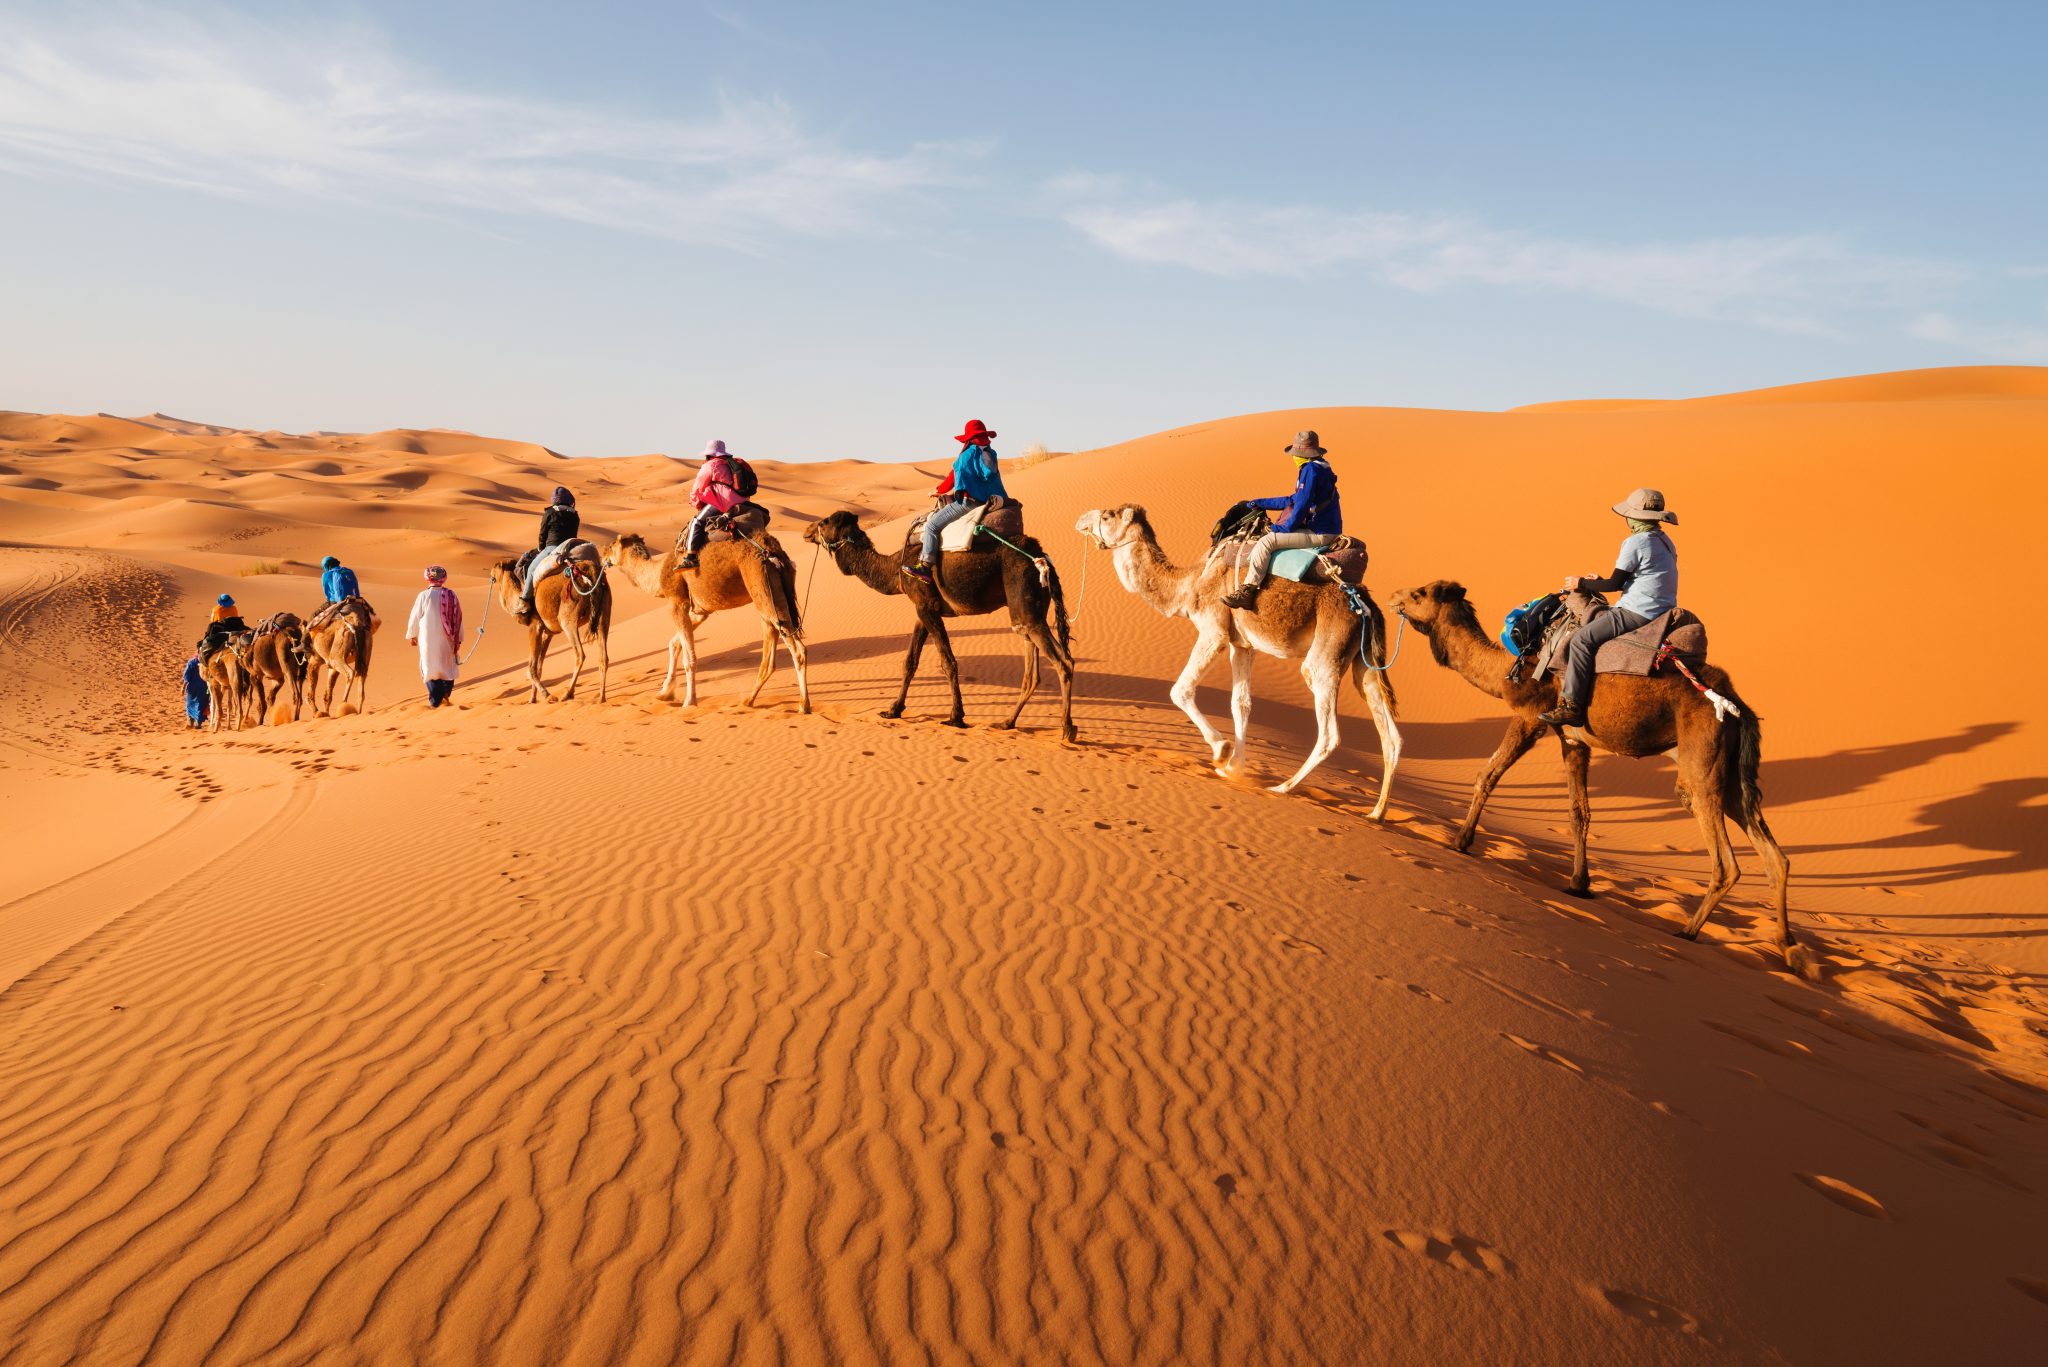 10 Facts About the Sahara Desert